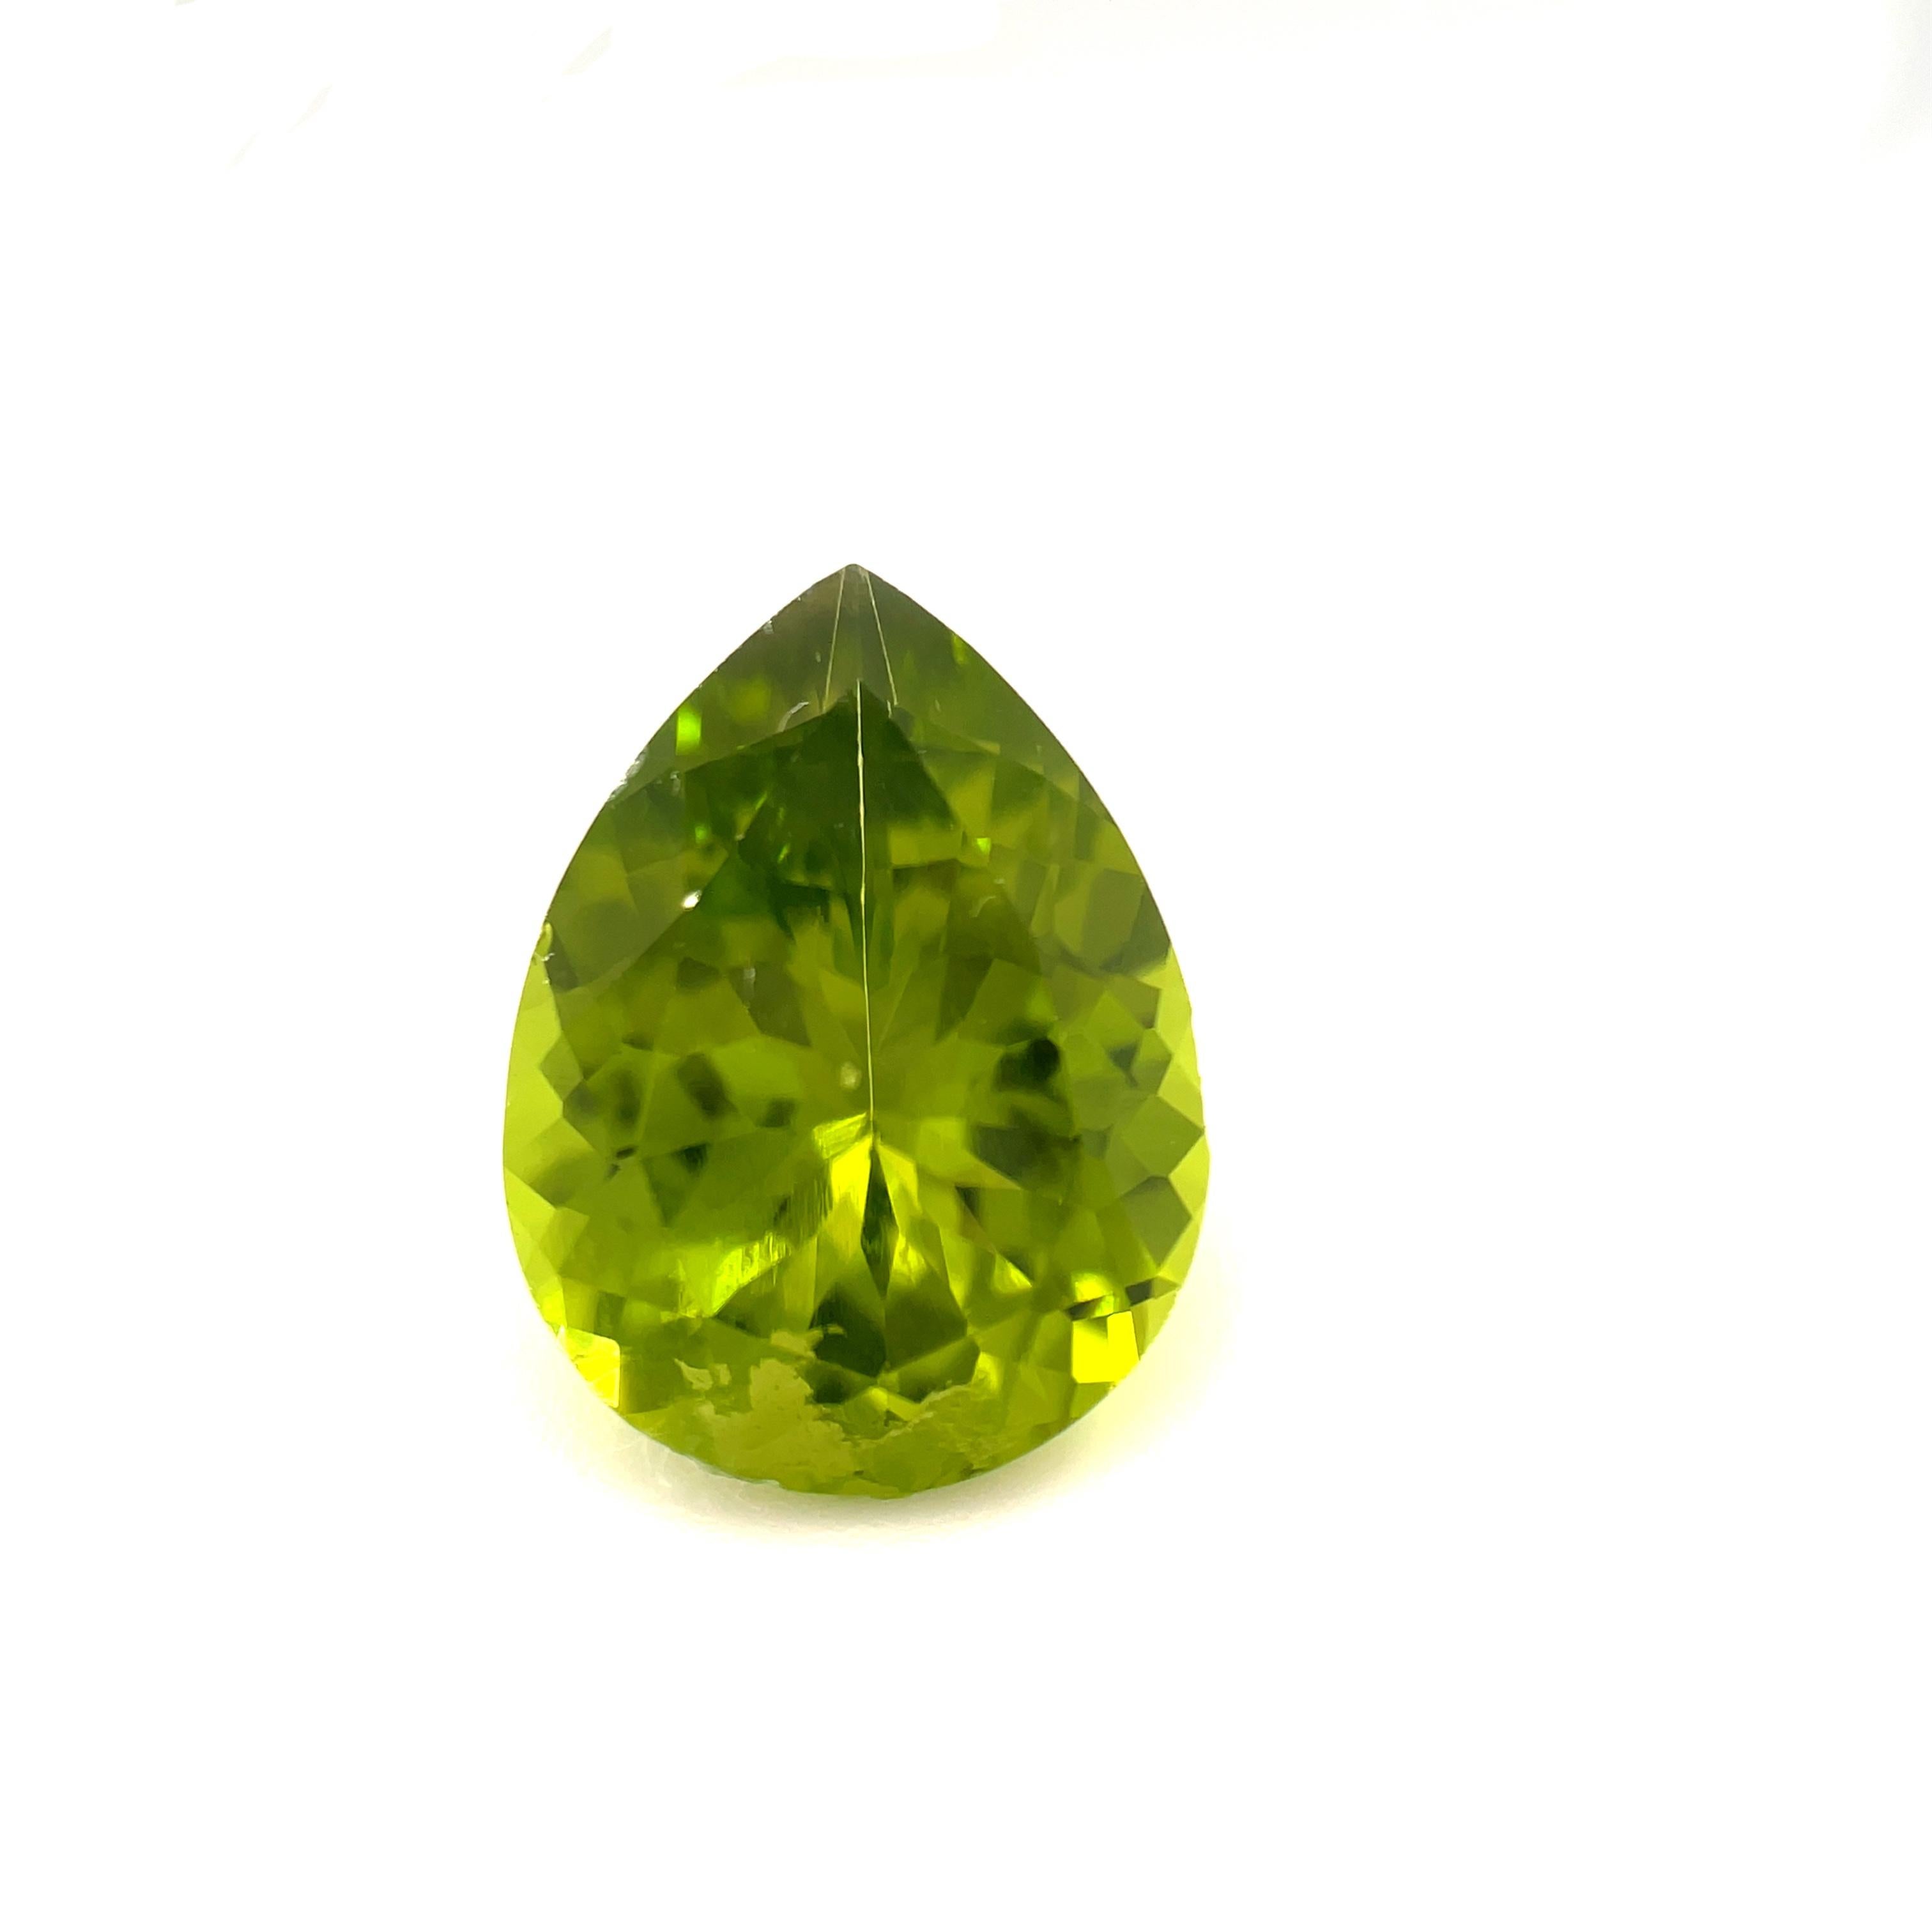 This 4.56 carat pear shaped peridot would make a beautiful custom-made ring or pendant! It has gorgeous apple green color, a beautiful shape and eye-catching sparkle. Measuring 13.30 x 10.01 x 5.98mm, this gem has lovely proportions and would lend